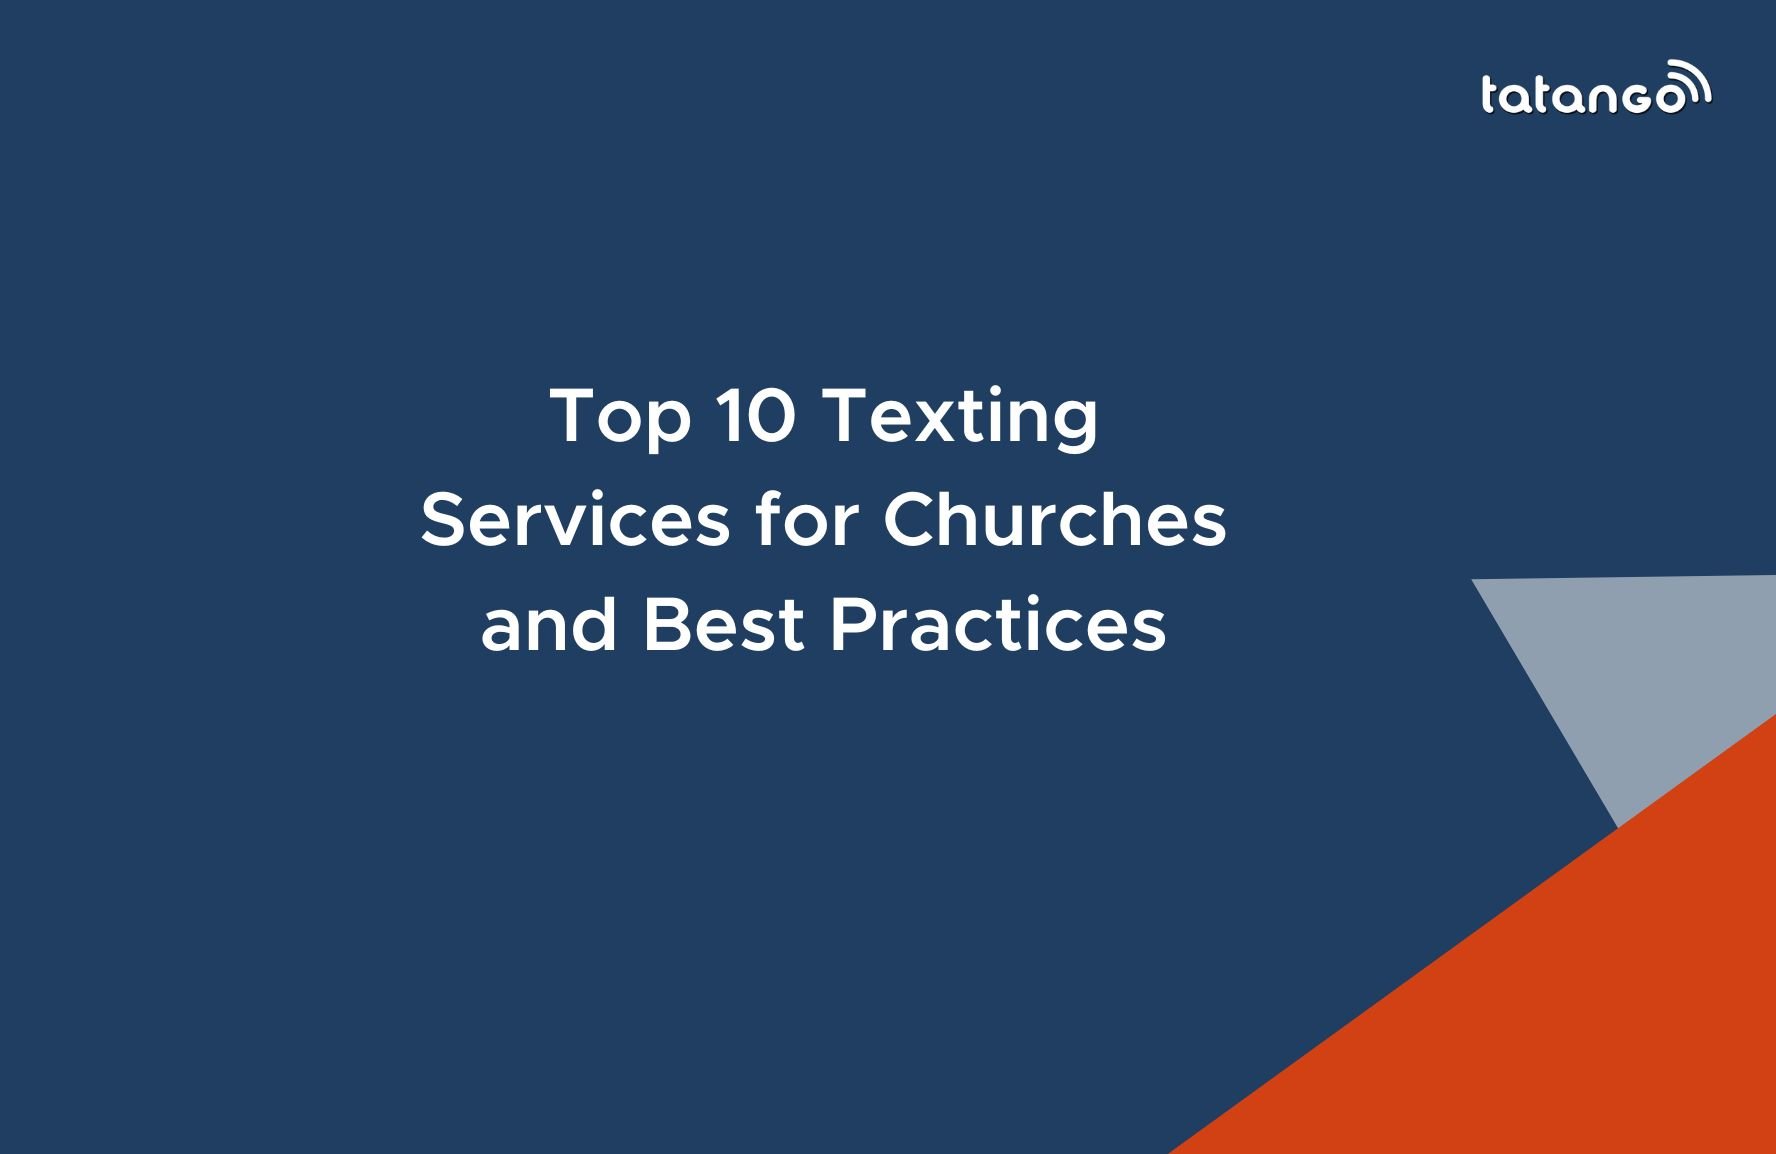 Top 10 Texting Services for Churches and Best Practices